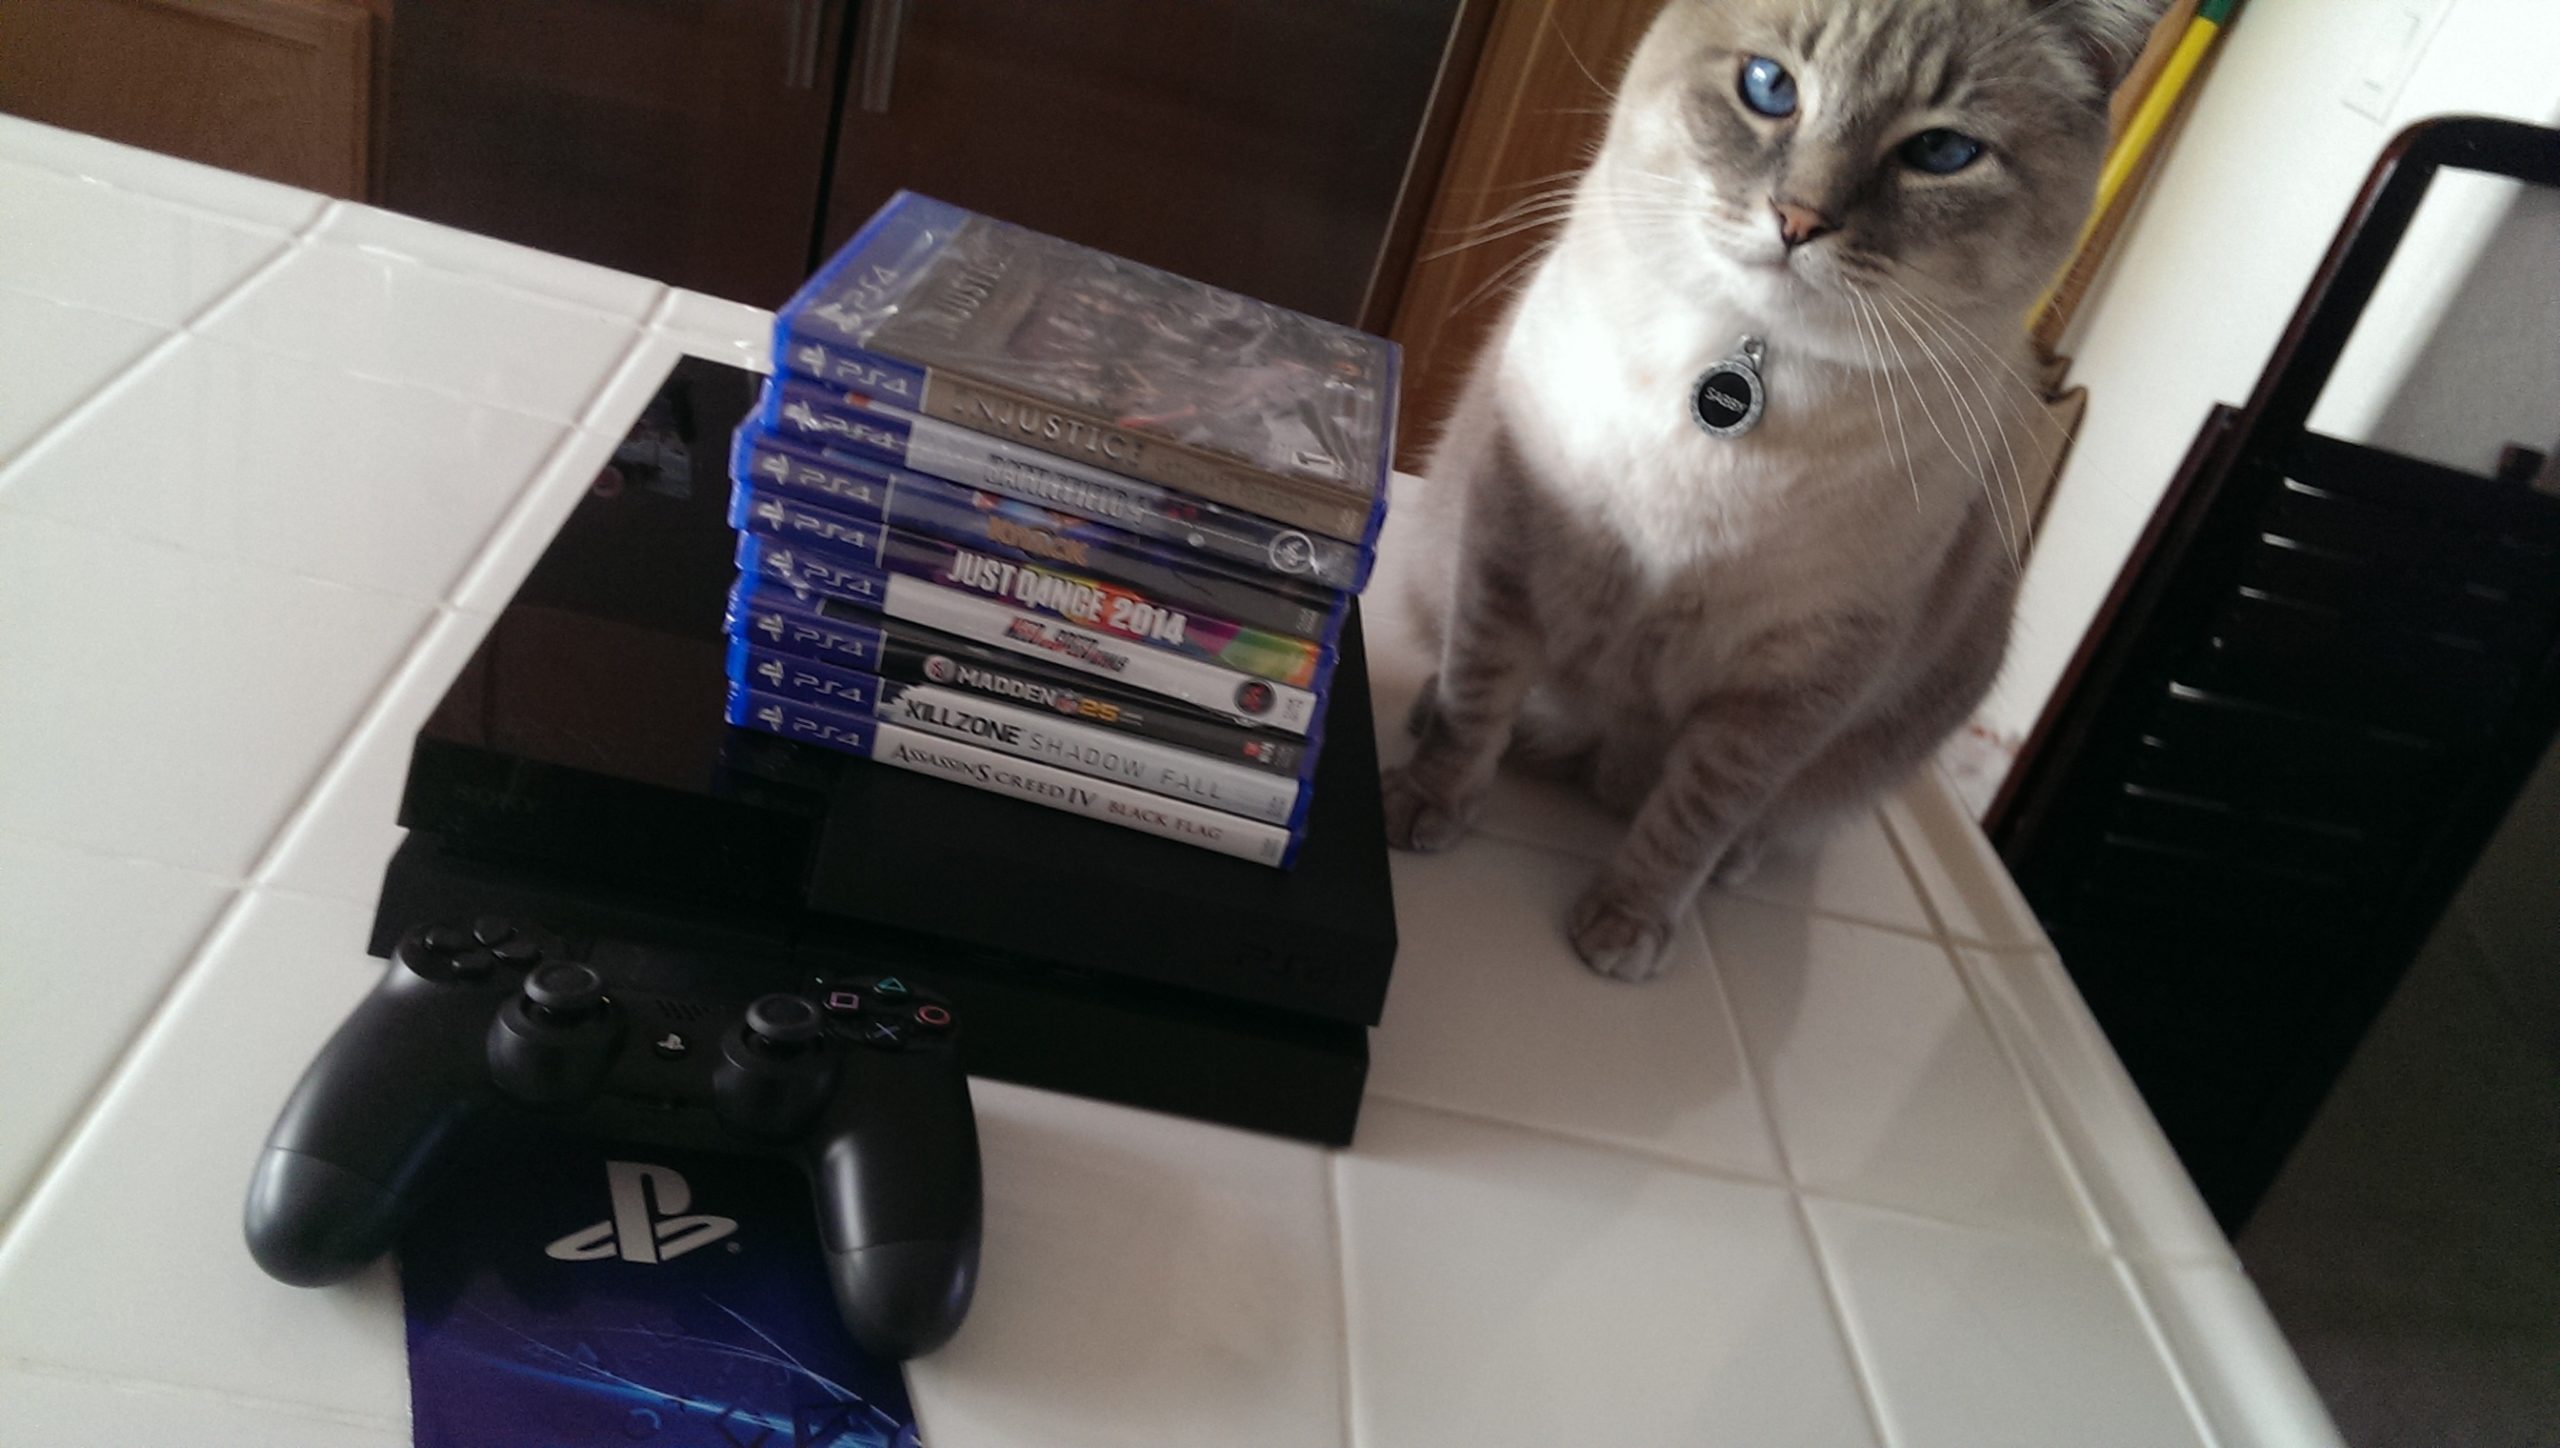 When Will This ​Shameful Act Of Licking Video Game Hardware Go Away?